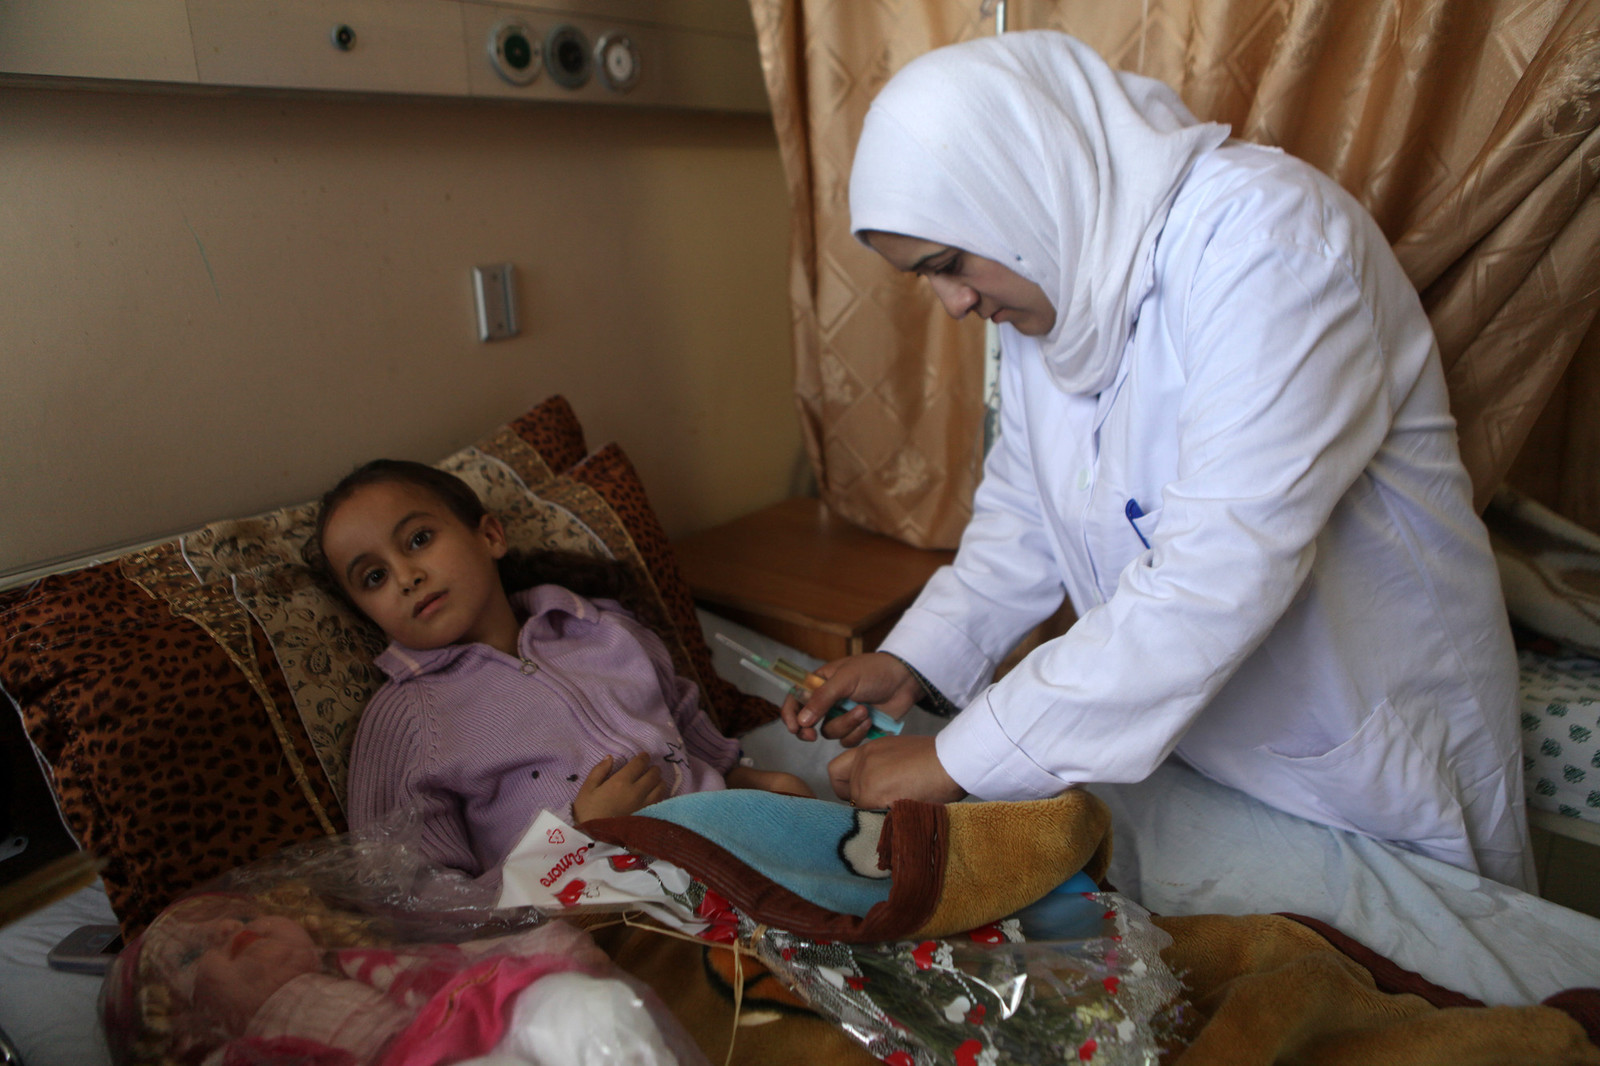 As we honor health care professionals in this pandemic, we must remember Razan al-Najjar and all health care workers in Palestine